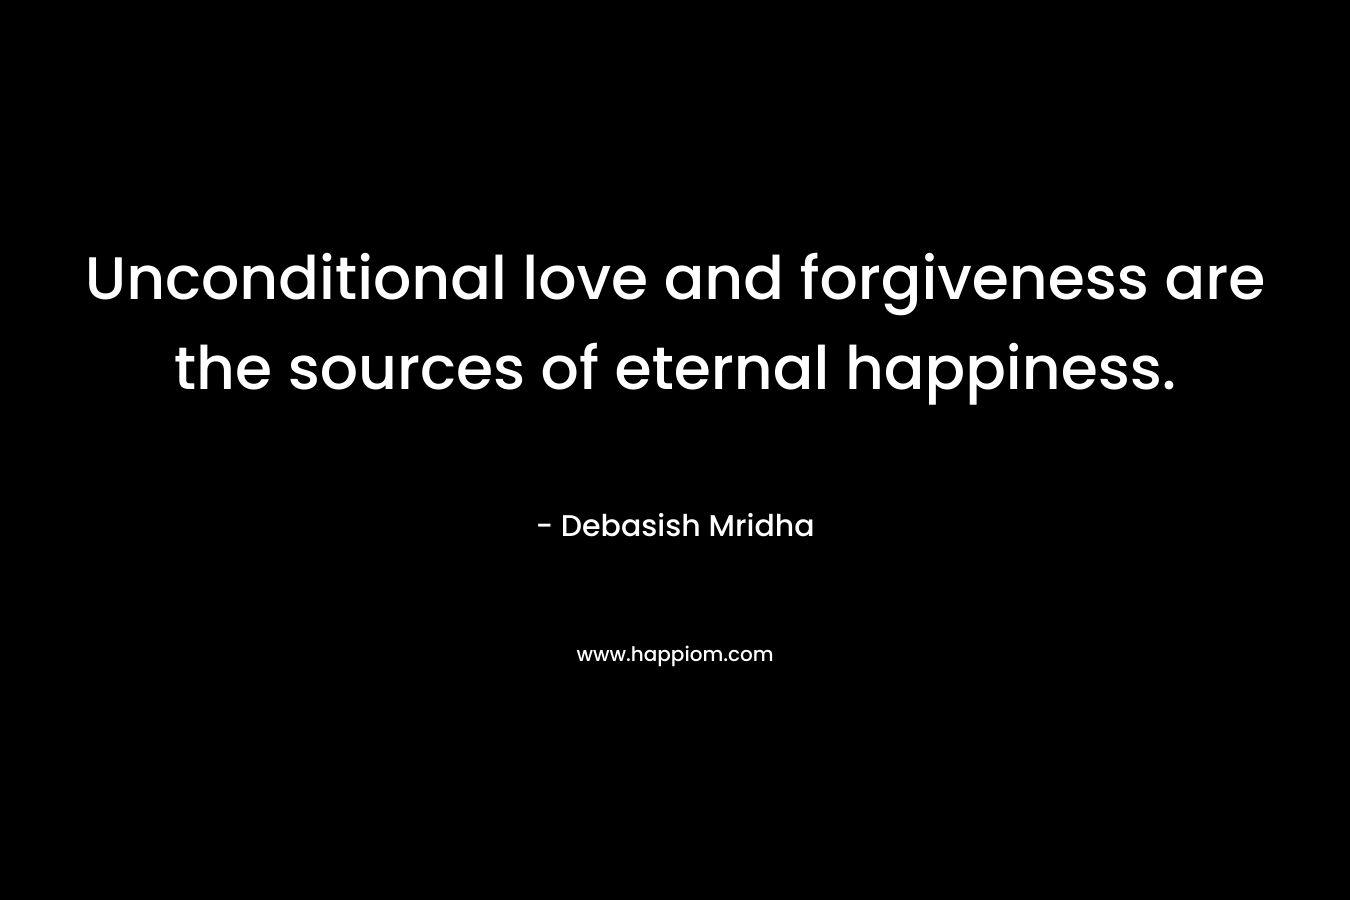 Unconditional love and forgiveness are the sources of eternal happiness.